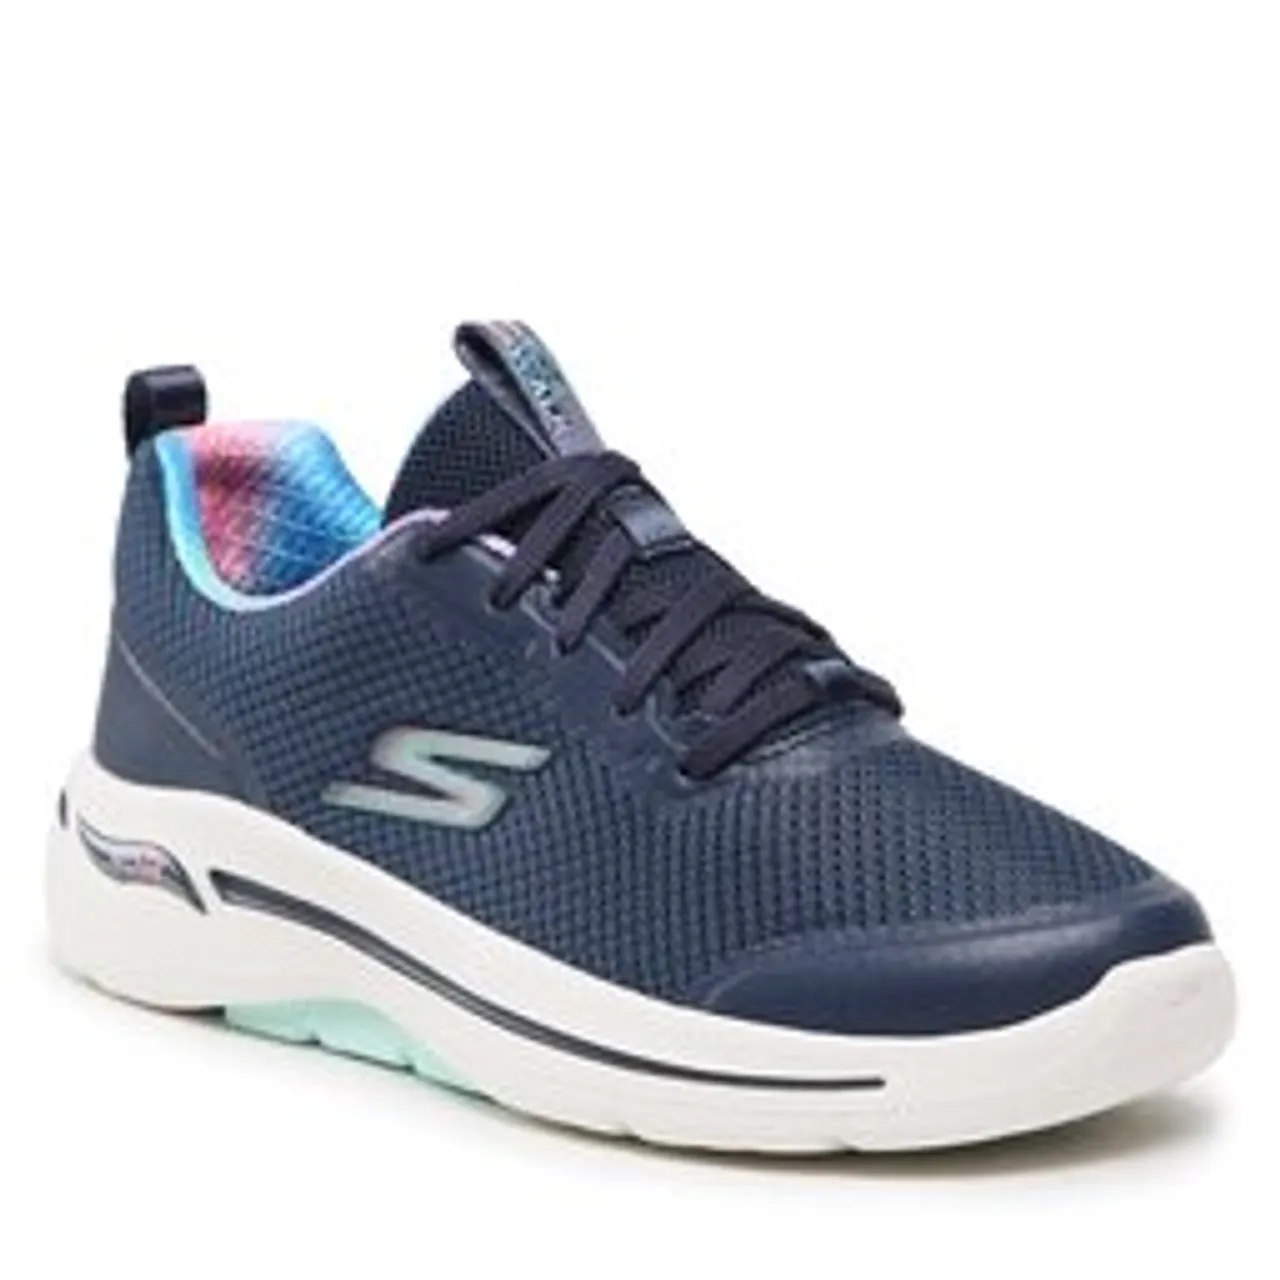 Sneakers Skechers Go Walk Arch Fit 124868/NVTQ Navy/Turquoise